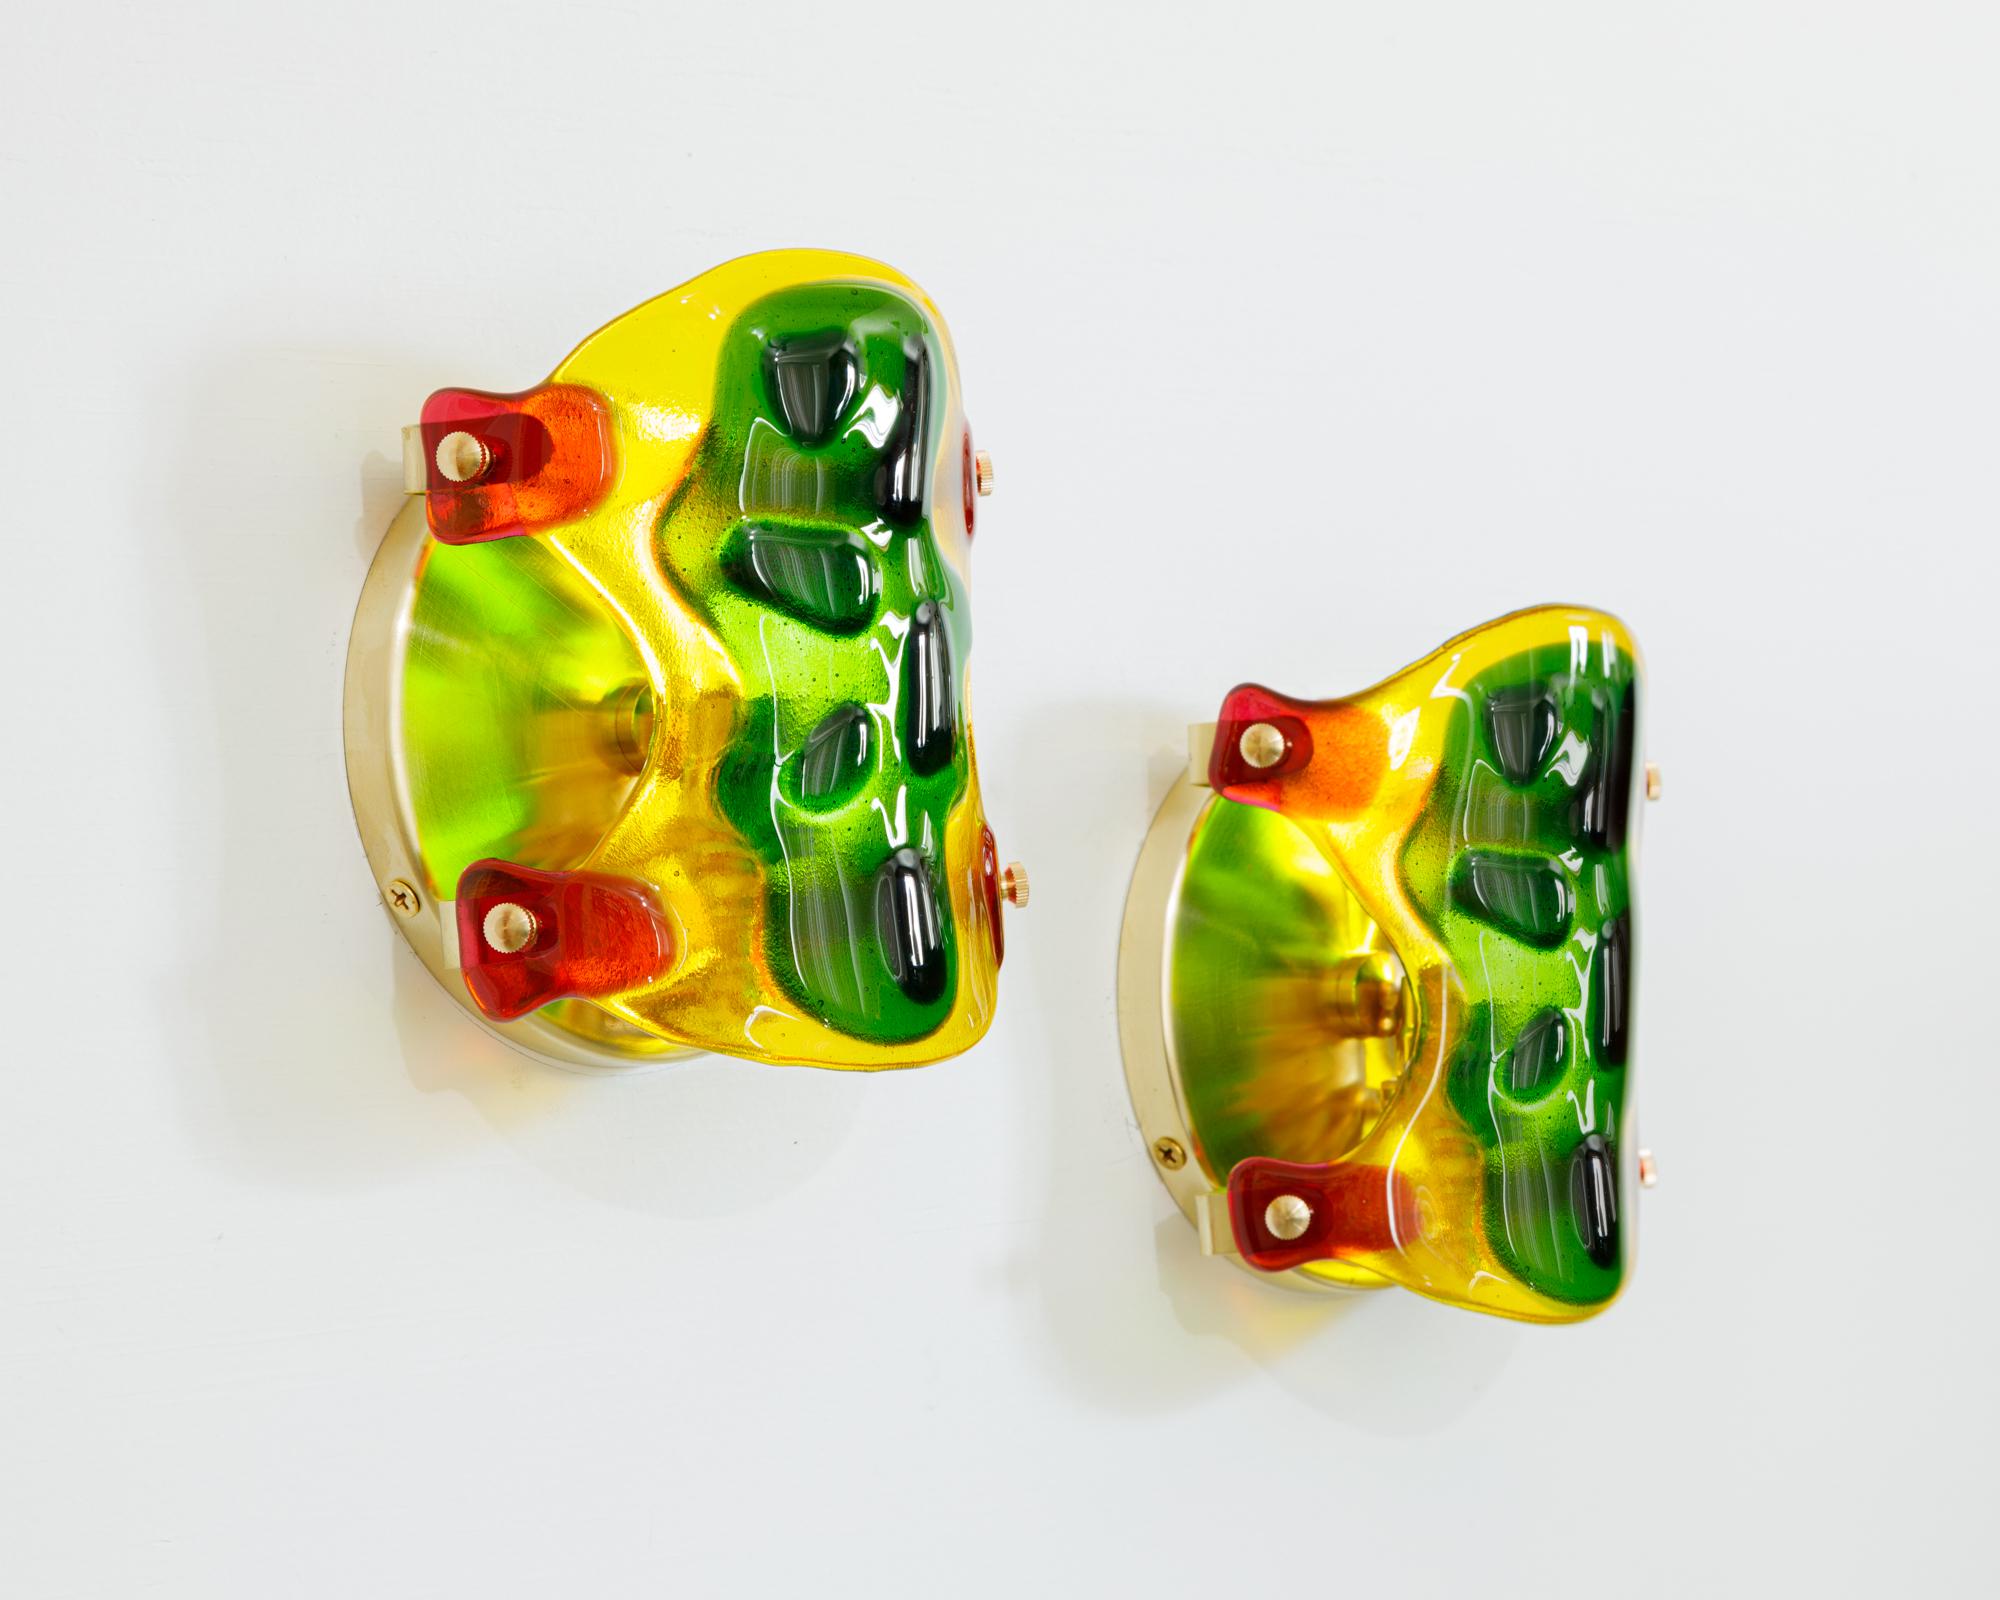 Psychedelic shells are the first design in Another Human's magical evolution collection, a series of one of a kind glass sconces inspired by fantasy flora and fauna.

These glass and brass sconces are meant to appear like tortoise shells belonging